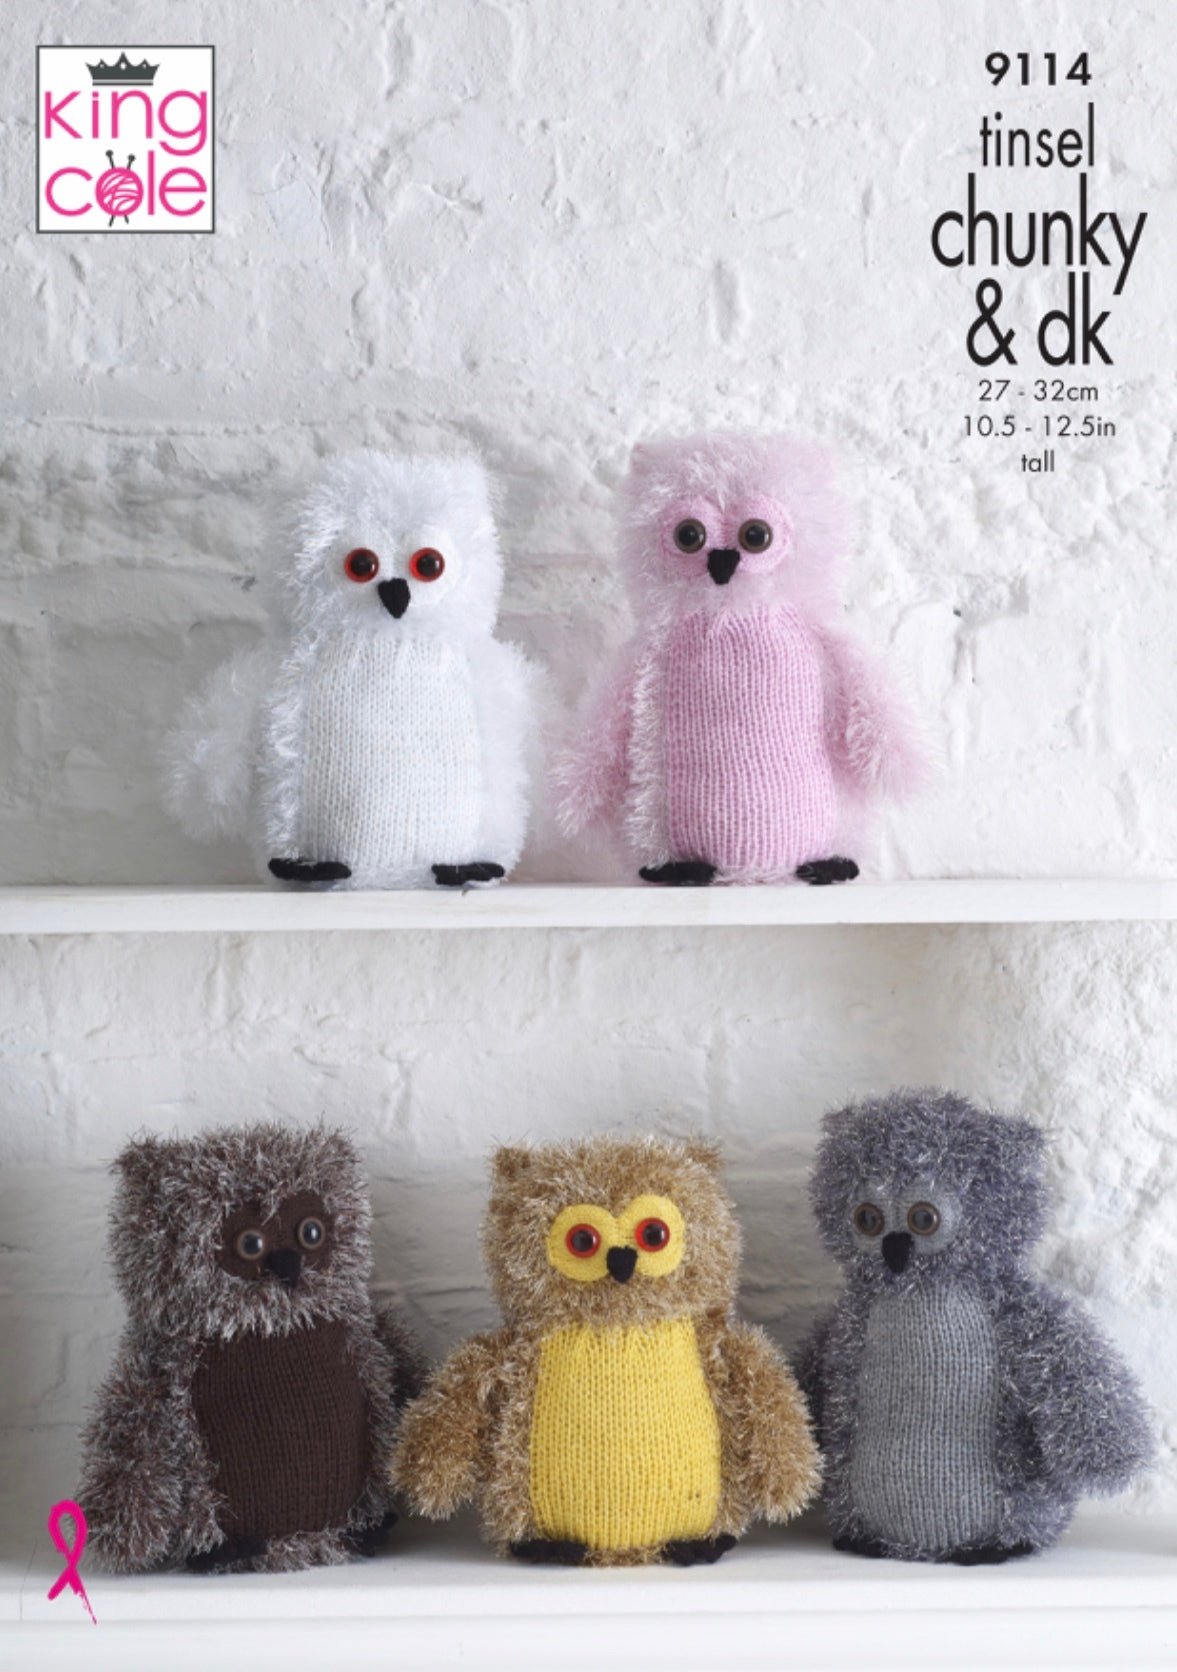 King Cole Pattern 9114 Owls in Tinsel Chunky